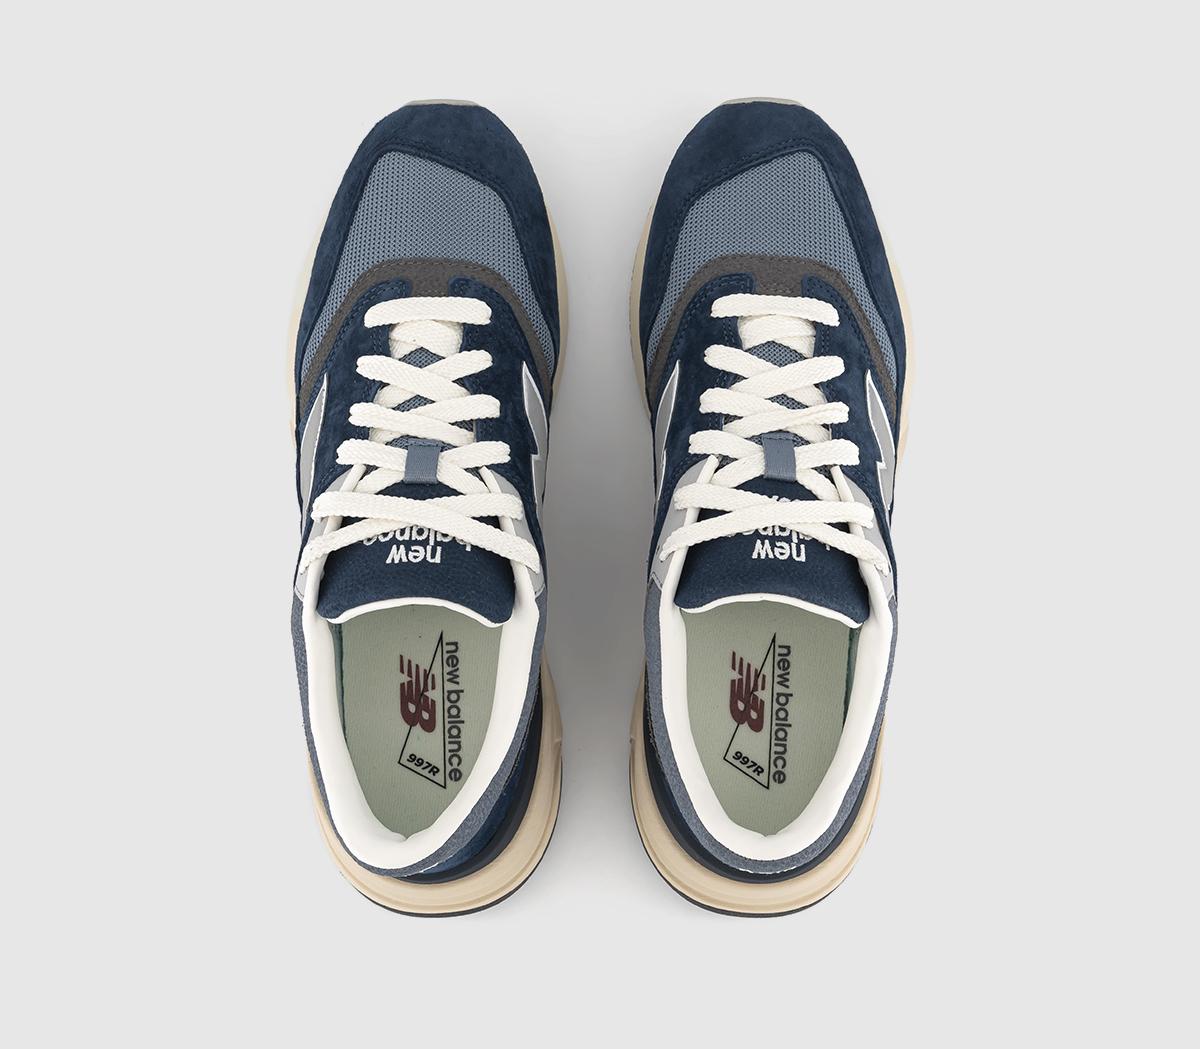 New Balance U997 Trainers Nb Navy Grey Offwhite - Men's Trainers